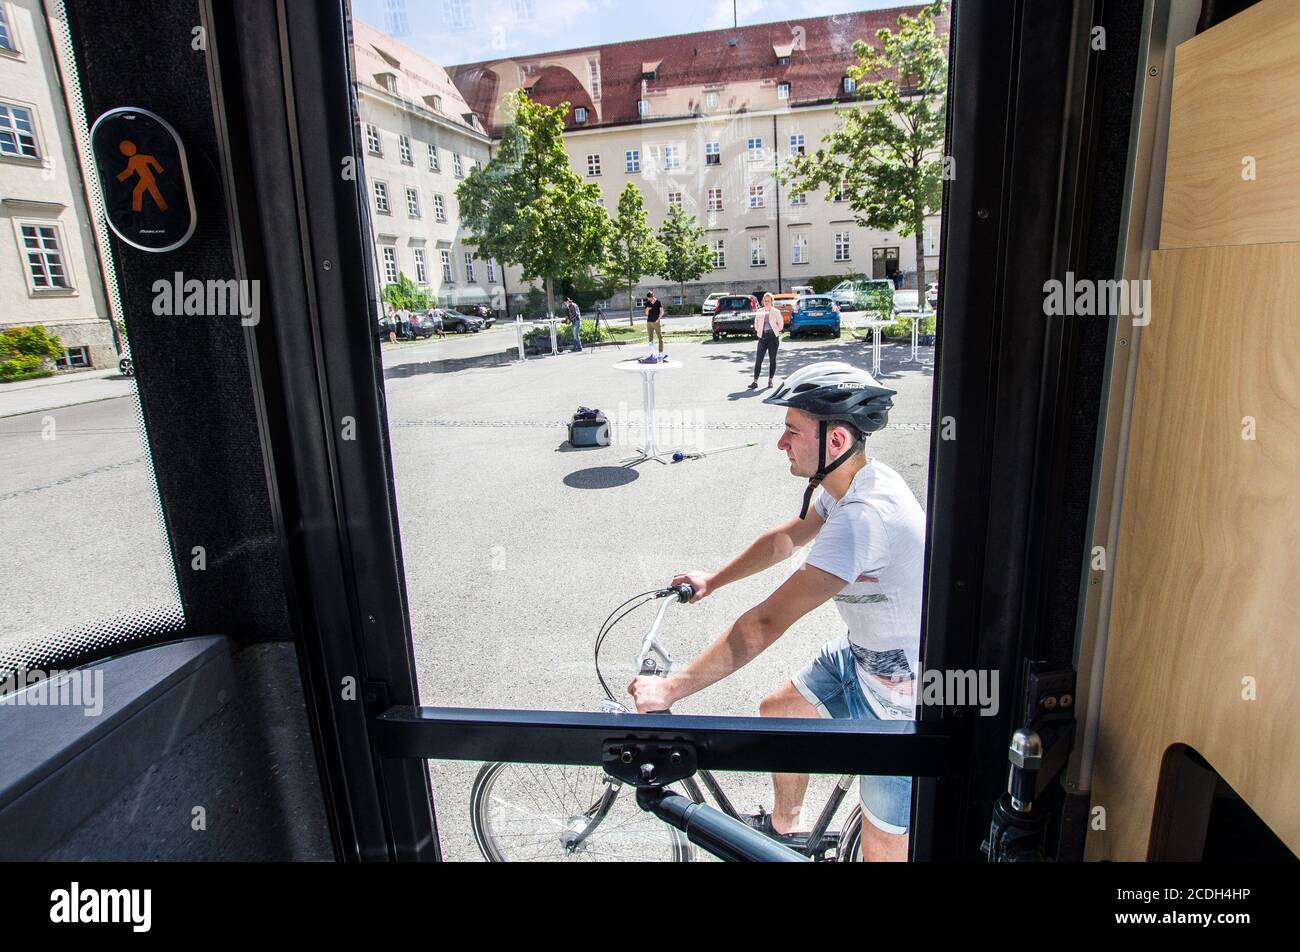 August 28, 2020, Munich, Bavaria, Germany: A member of the Munich Bereitschaftspolizei rides a bicycle to trigger the turning assistant systems.  Bavarian Interior Minister Joachim Herrmann alongside the Bavarian Police revealed service vehicles outfitted with the new turning assistant (Abbiegassistent) devices.  In 2018 alone 455 bicyclists were killed, with trucks turning blind as one preventable cause.  The turning assistant systems are currently voluntary, but in 2022 will become mandatory for old and new trucks and in 2024 for all vehicles as part of an EU-wide safety program. (Credit Ima Stock Photo